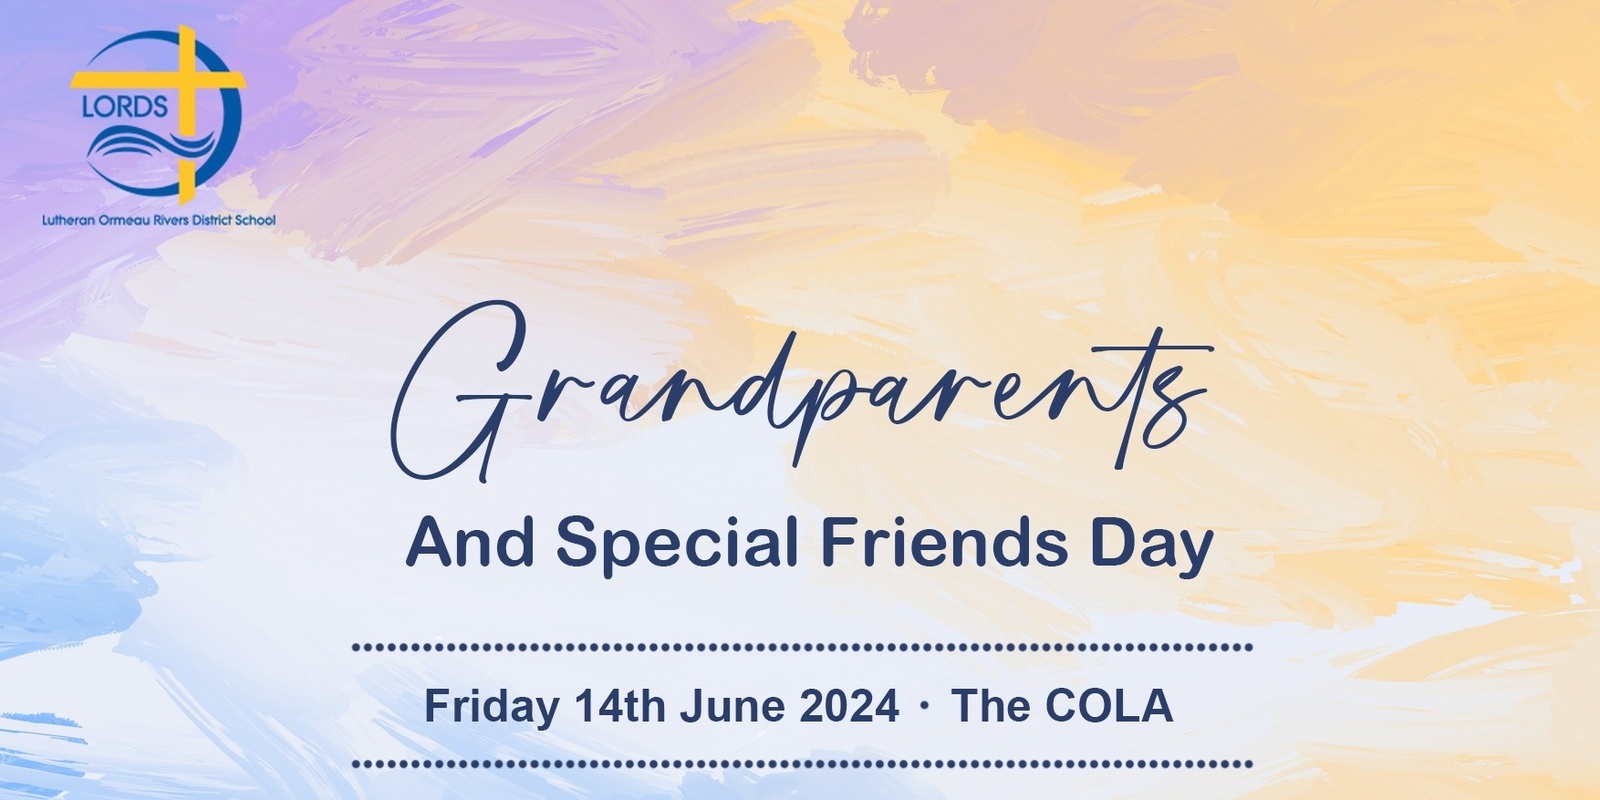 Banner image for LORDS GRANDPARENTS AND SPECIAL FRIENDS DAY 2024